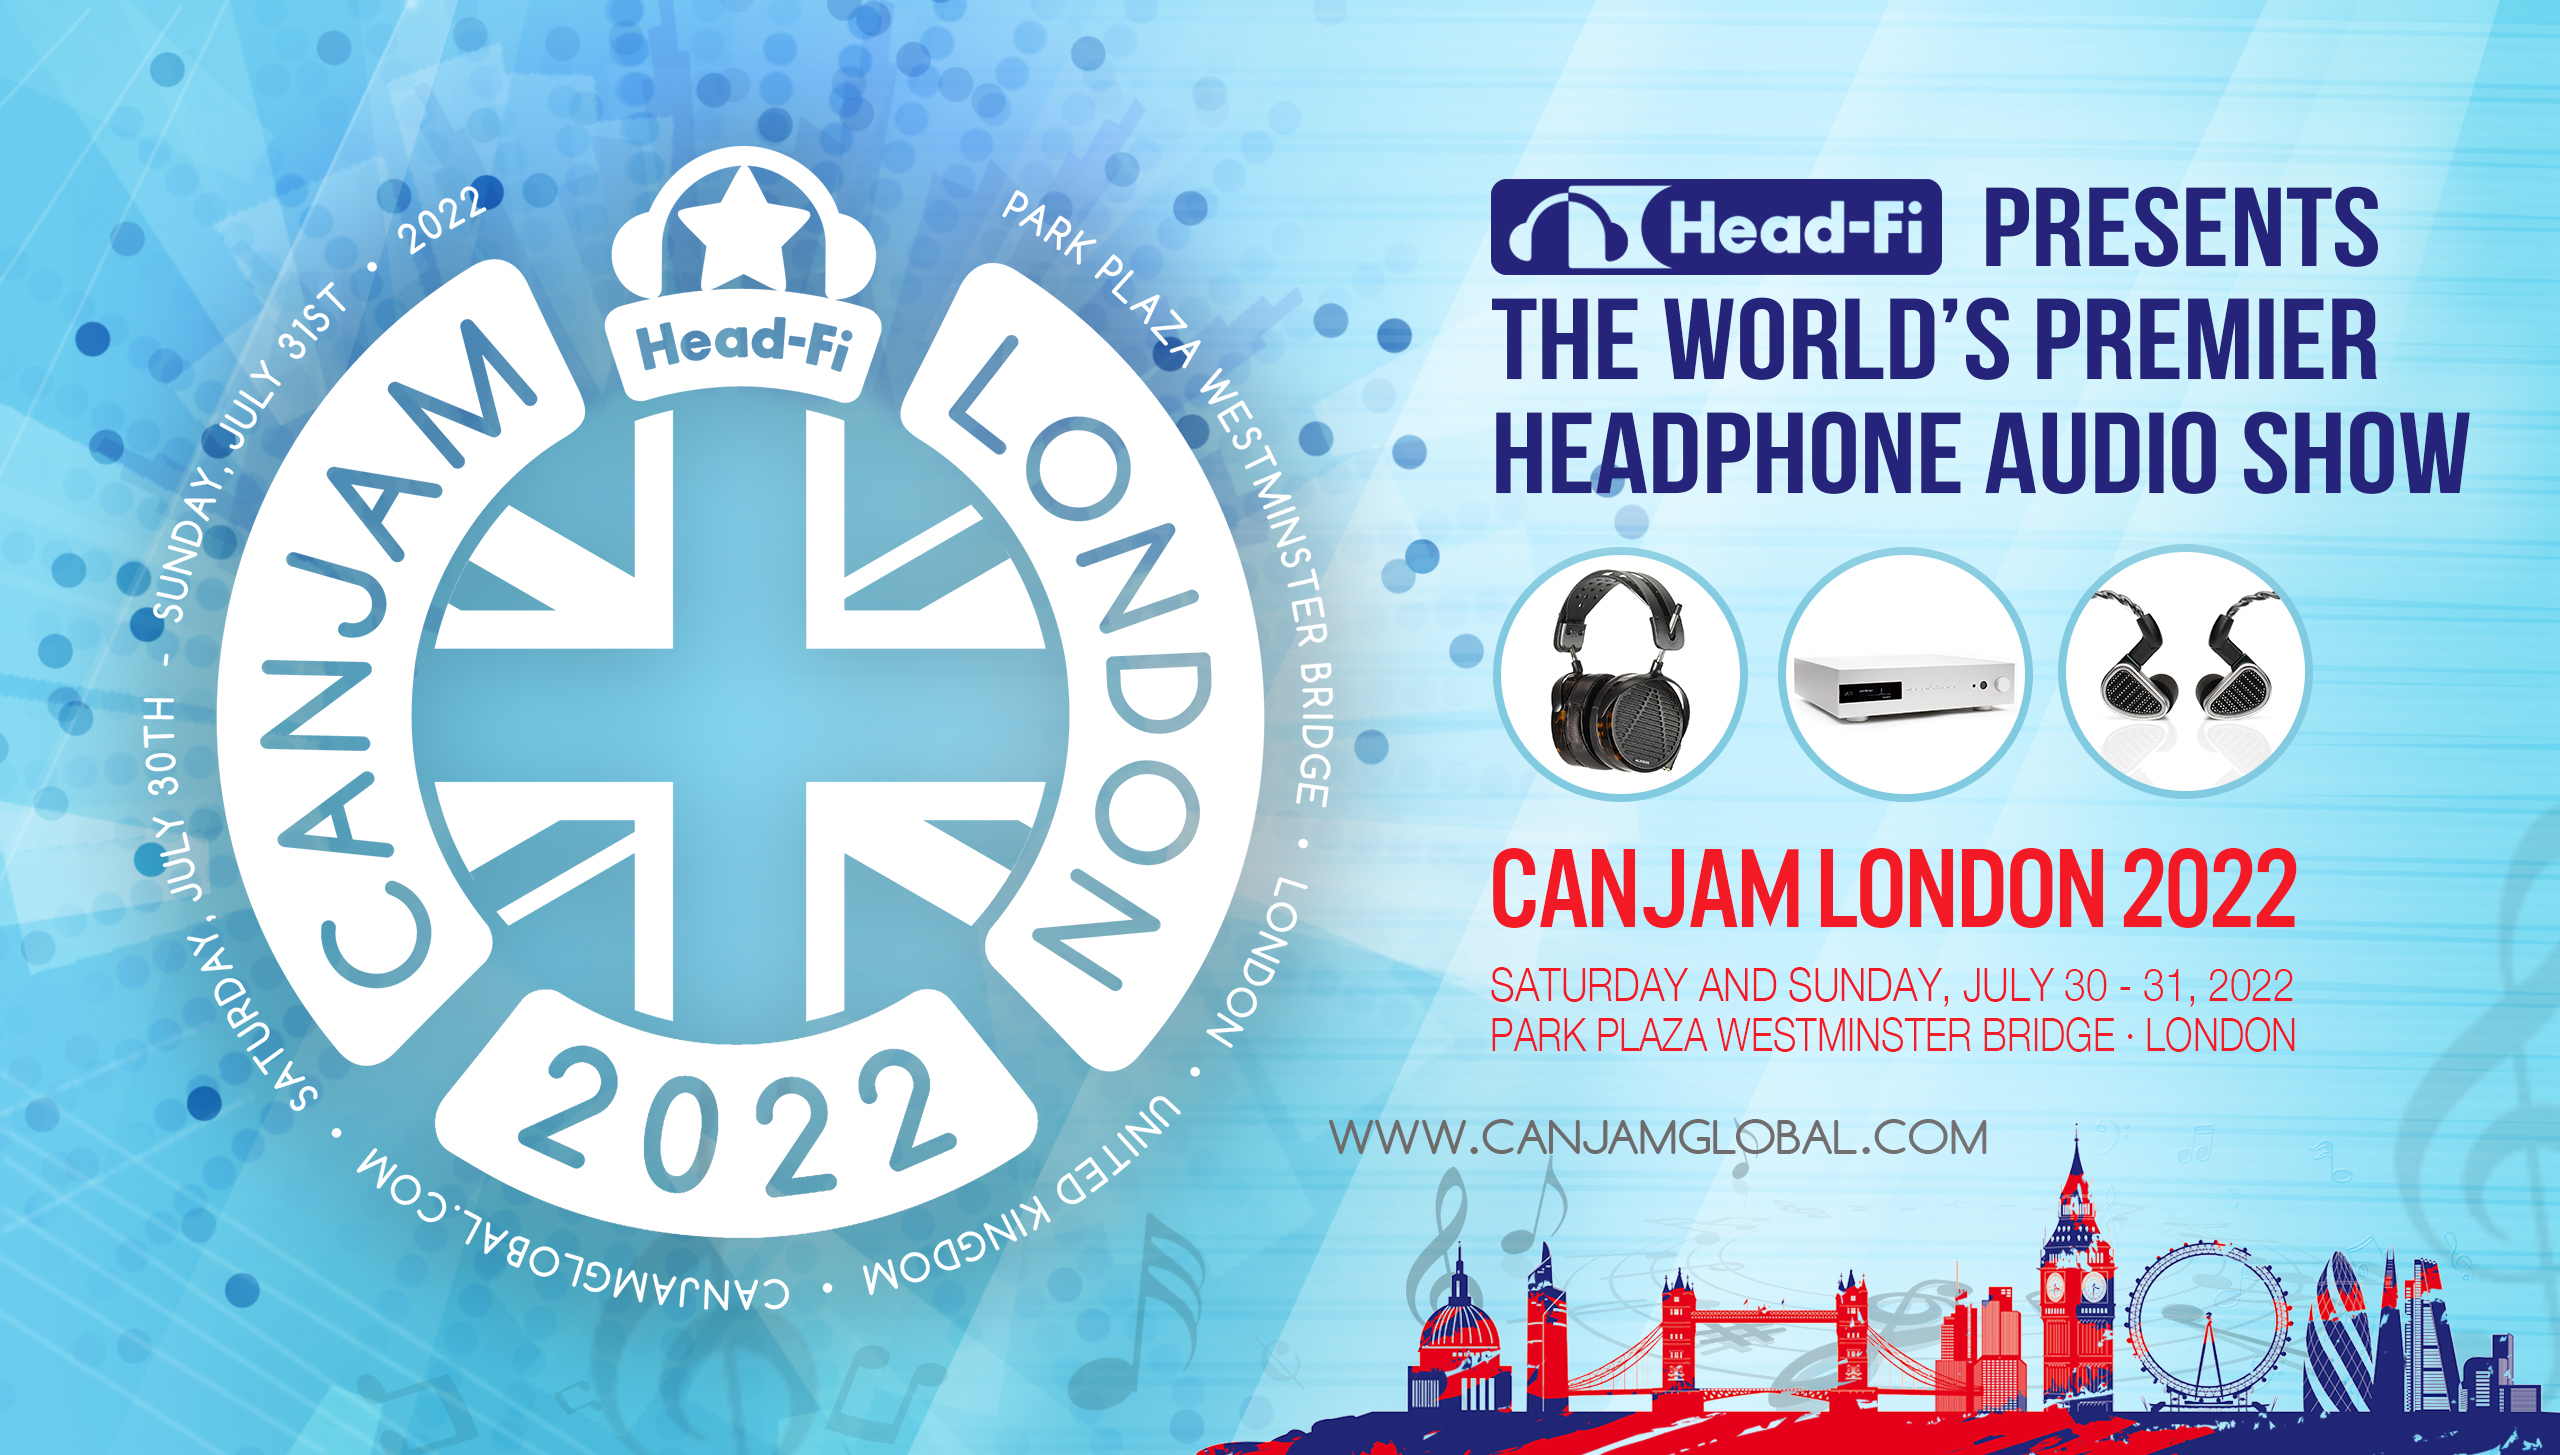 canjam london 2022 news and products guide